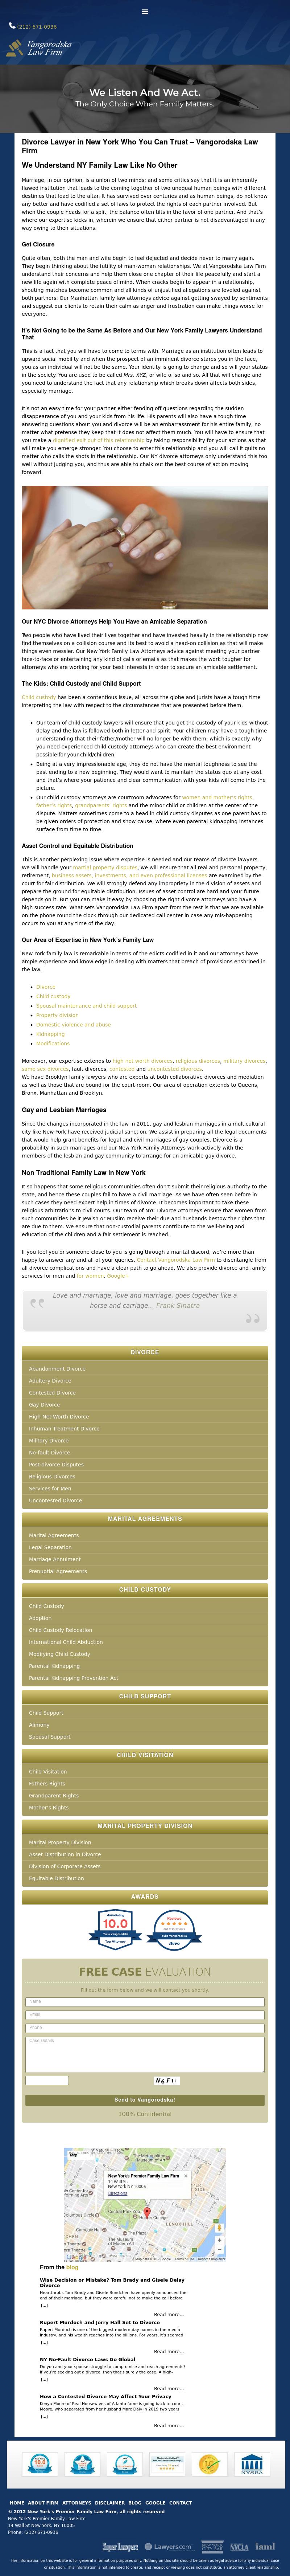 Provda Law Firm - New York NY Lawyers